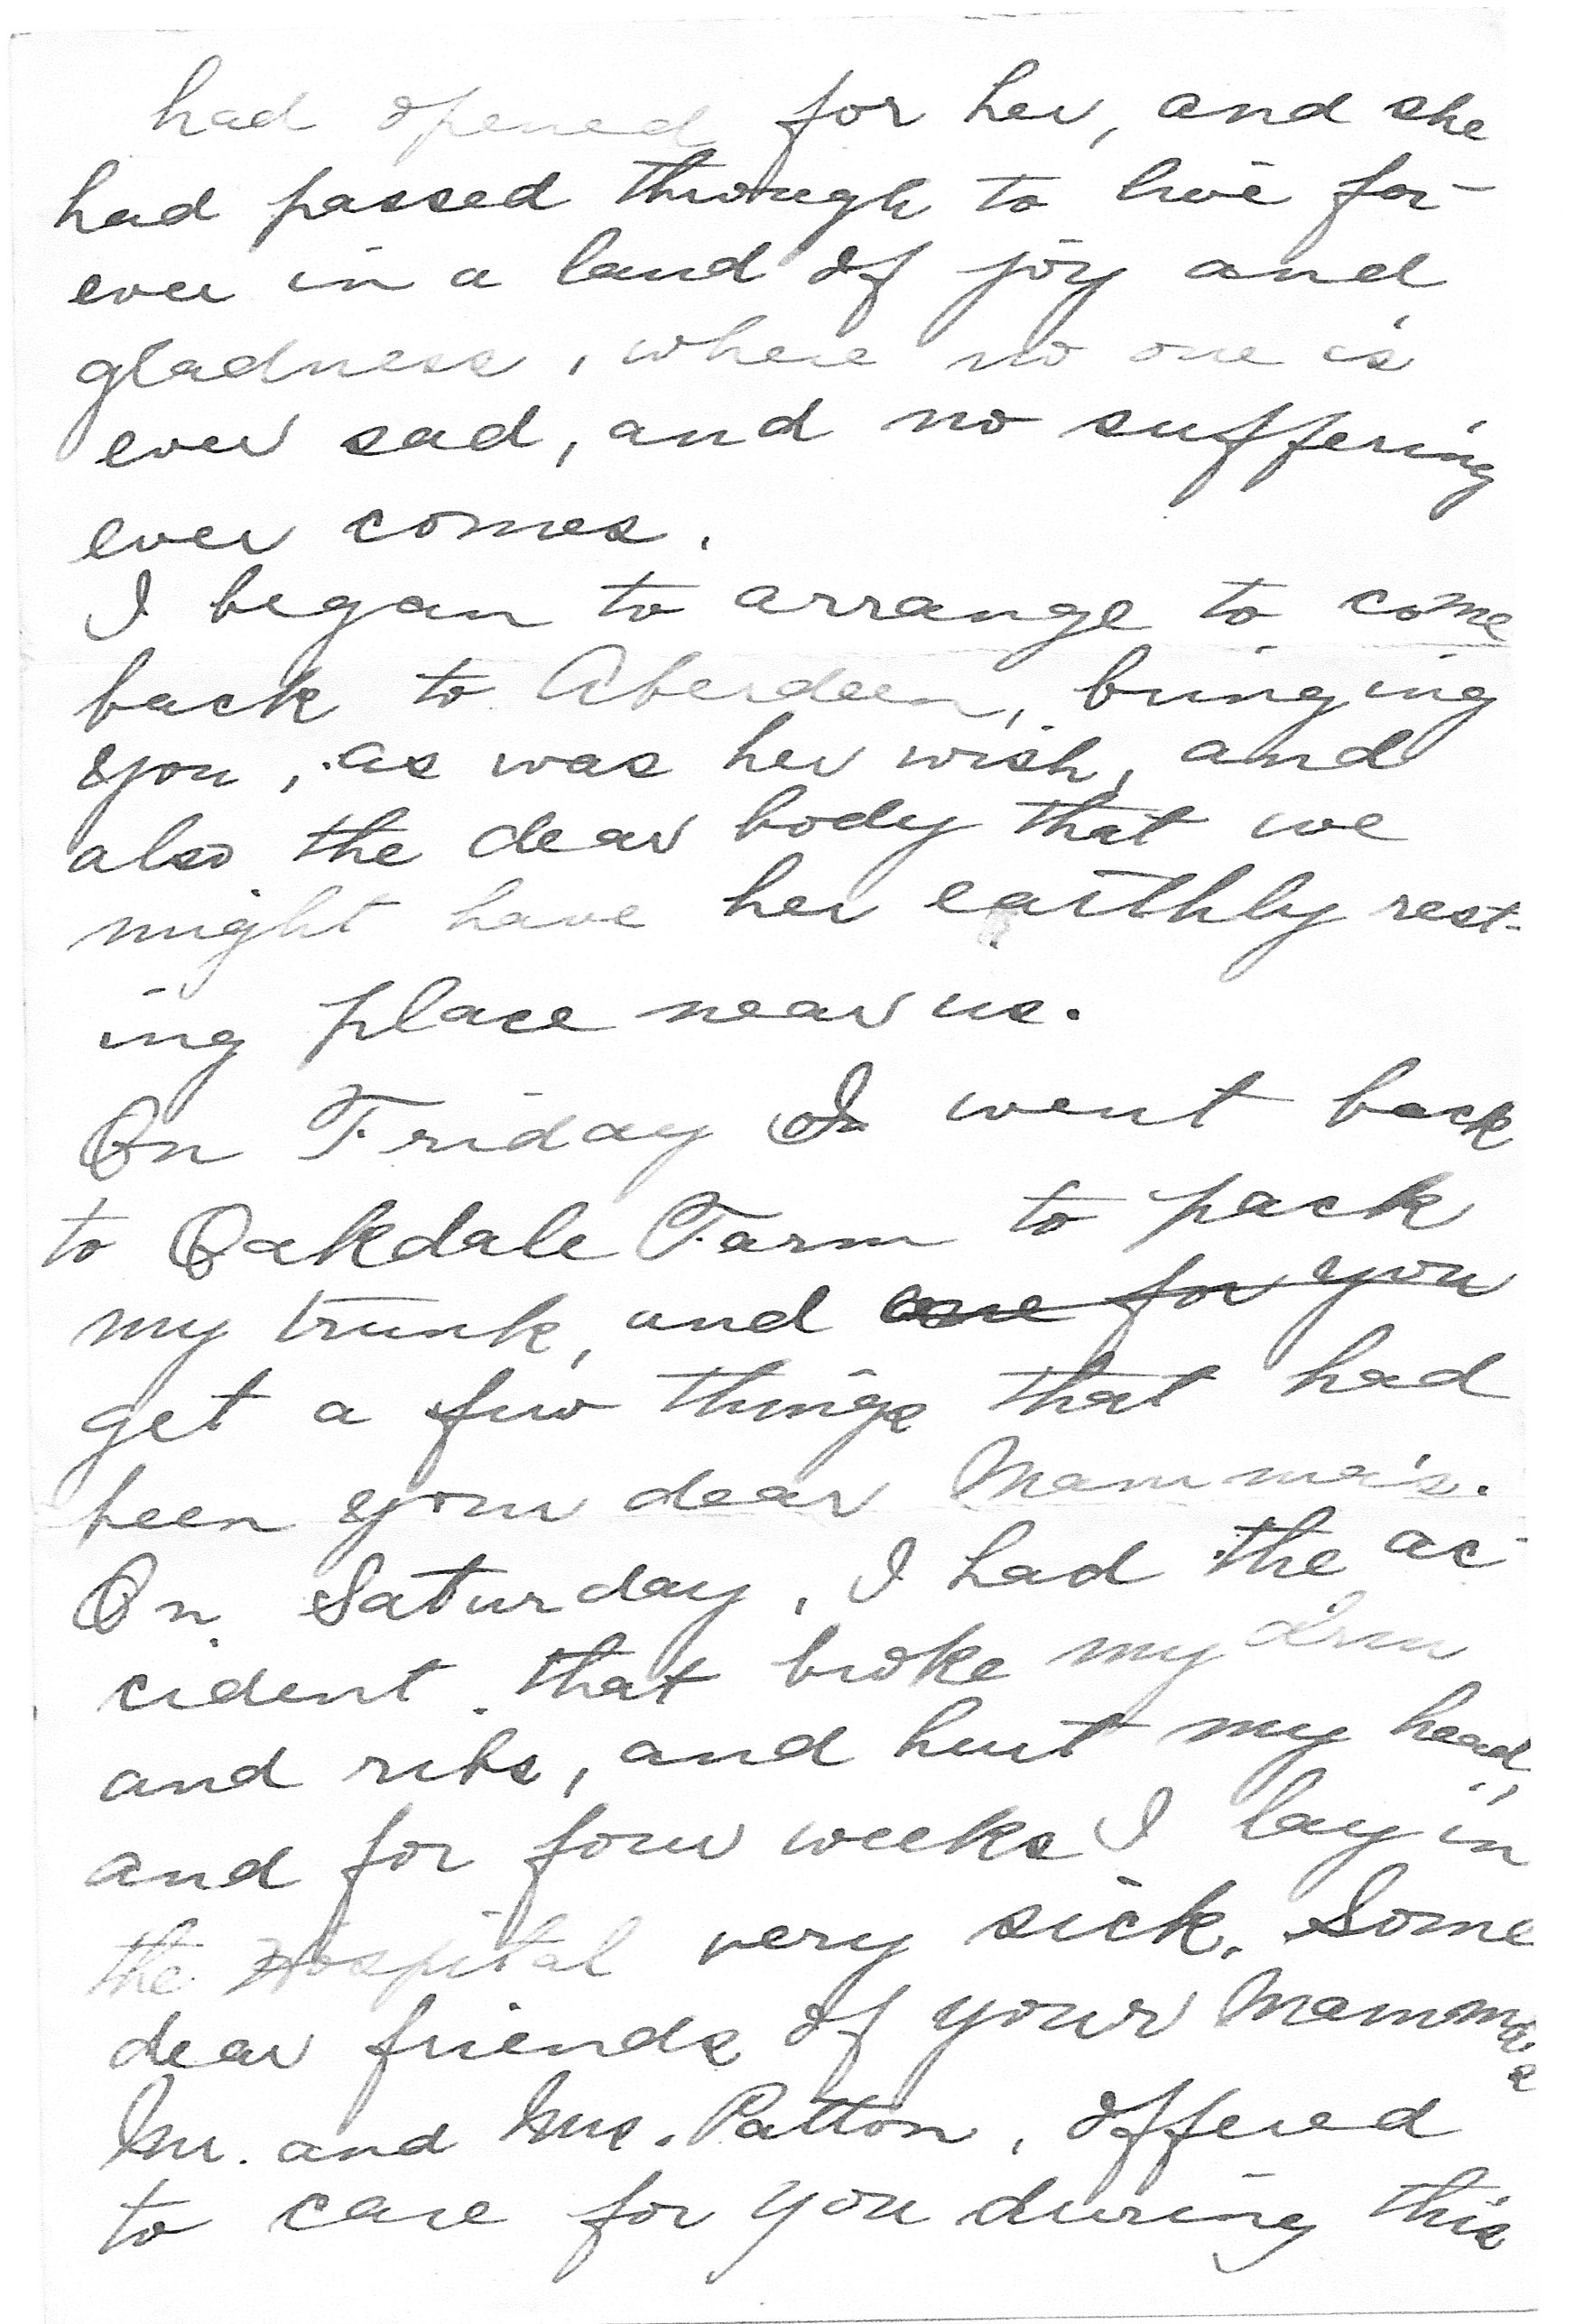 Letter to Horace page 7